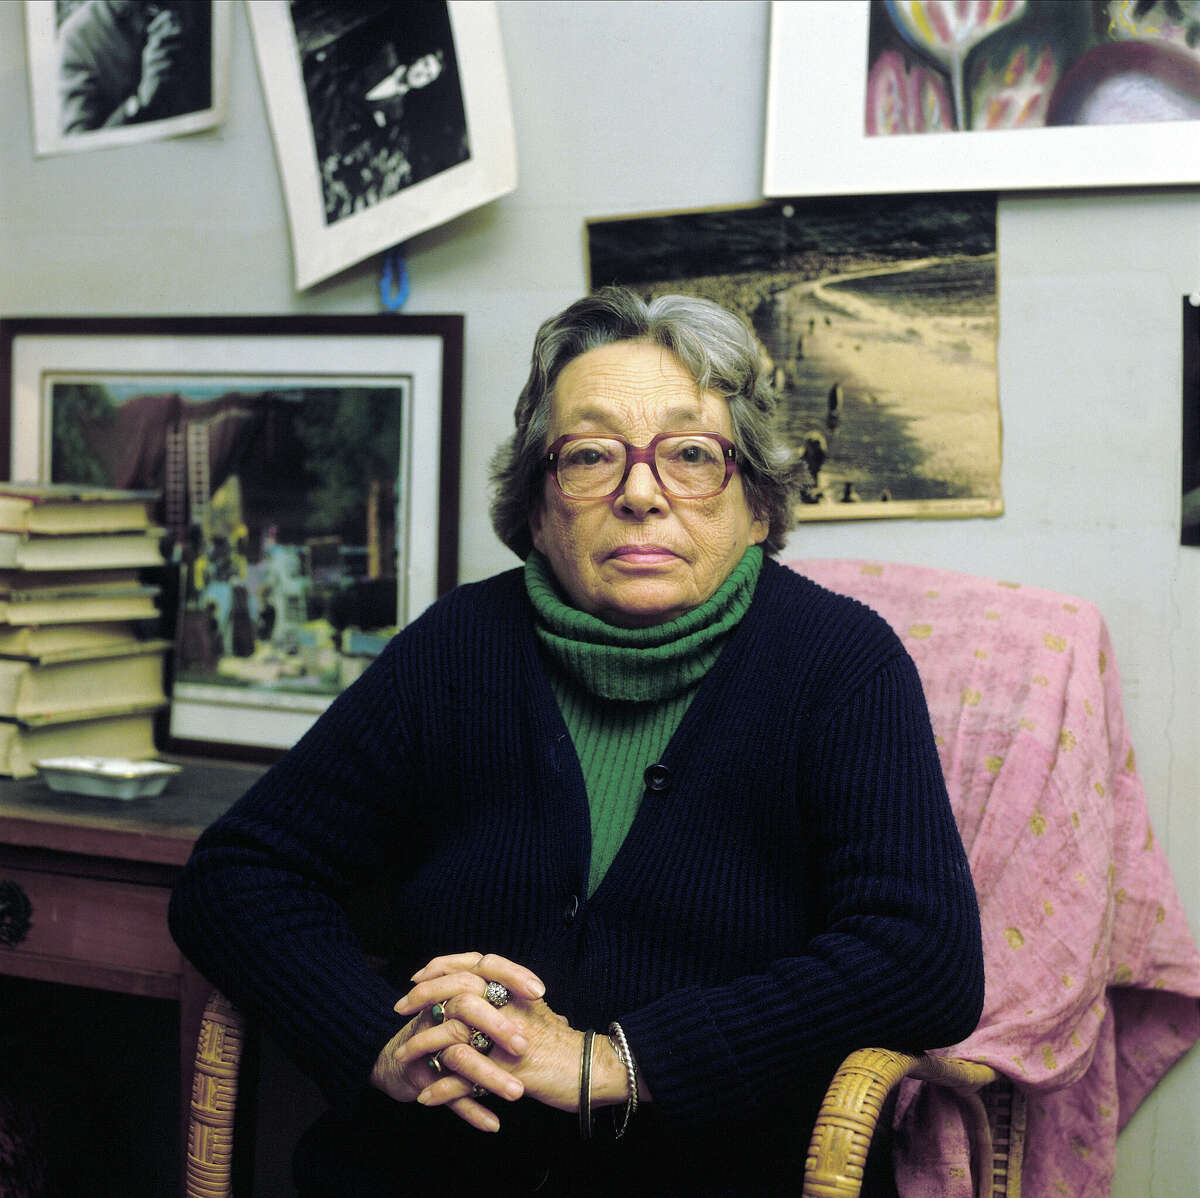 Marguerite Duras in France in October, 1984. Duras' "The Easy Life" will have an English release in December of 2022.